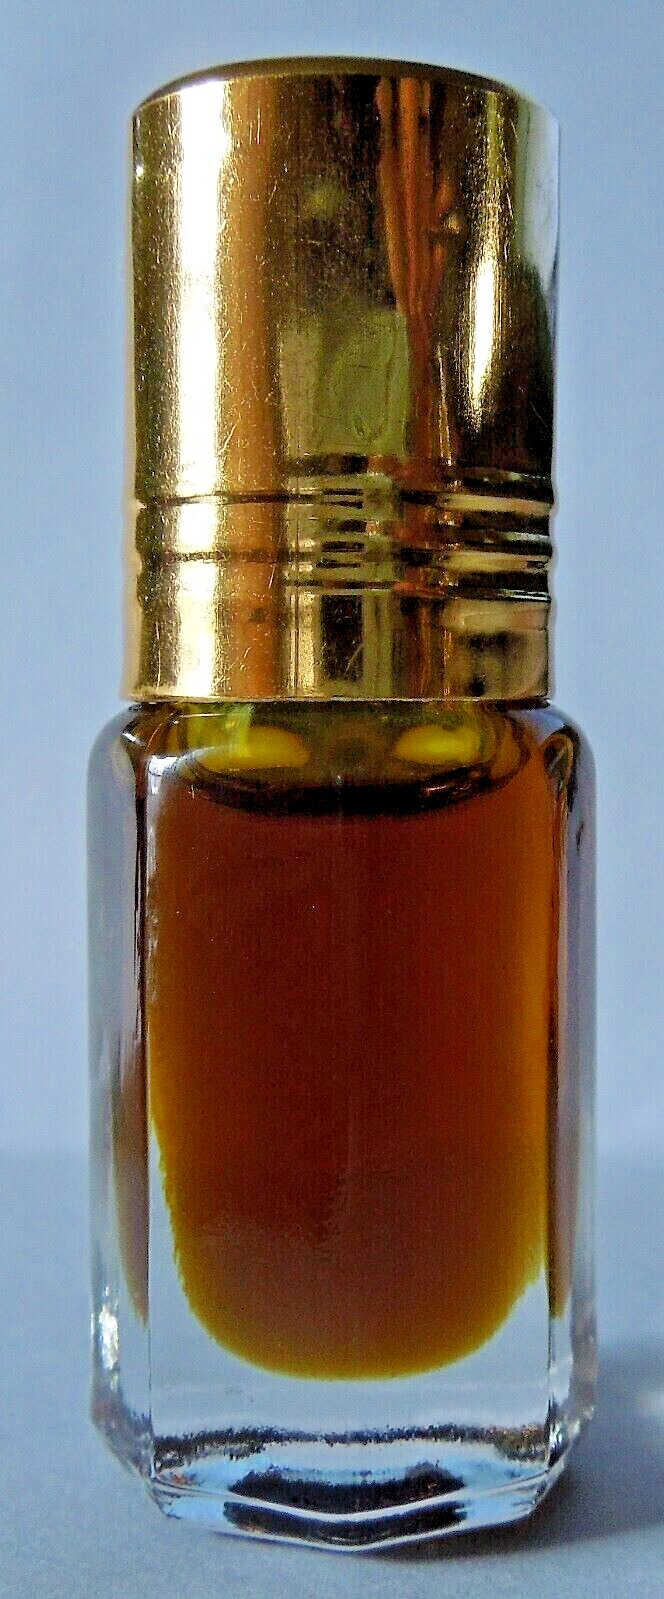 Rare Pure Indian Oud Strong Natural Heavy Oil Perfume 3ml Non Alcoholic عود هندي